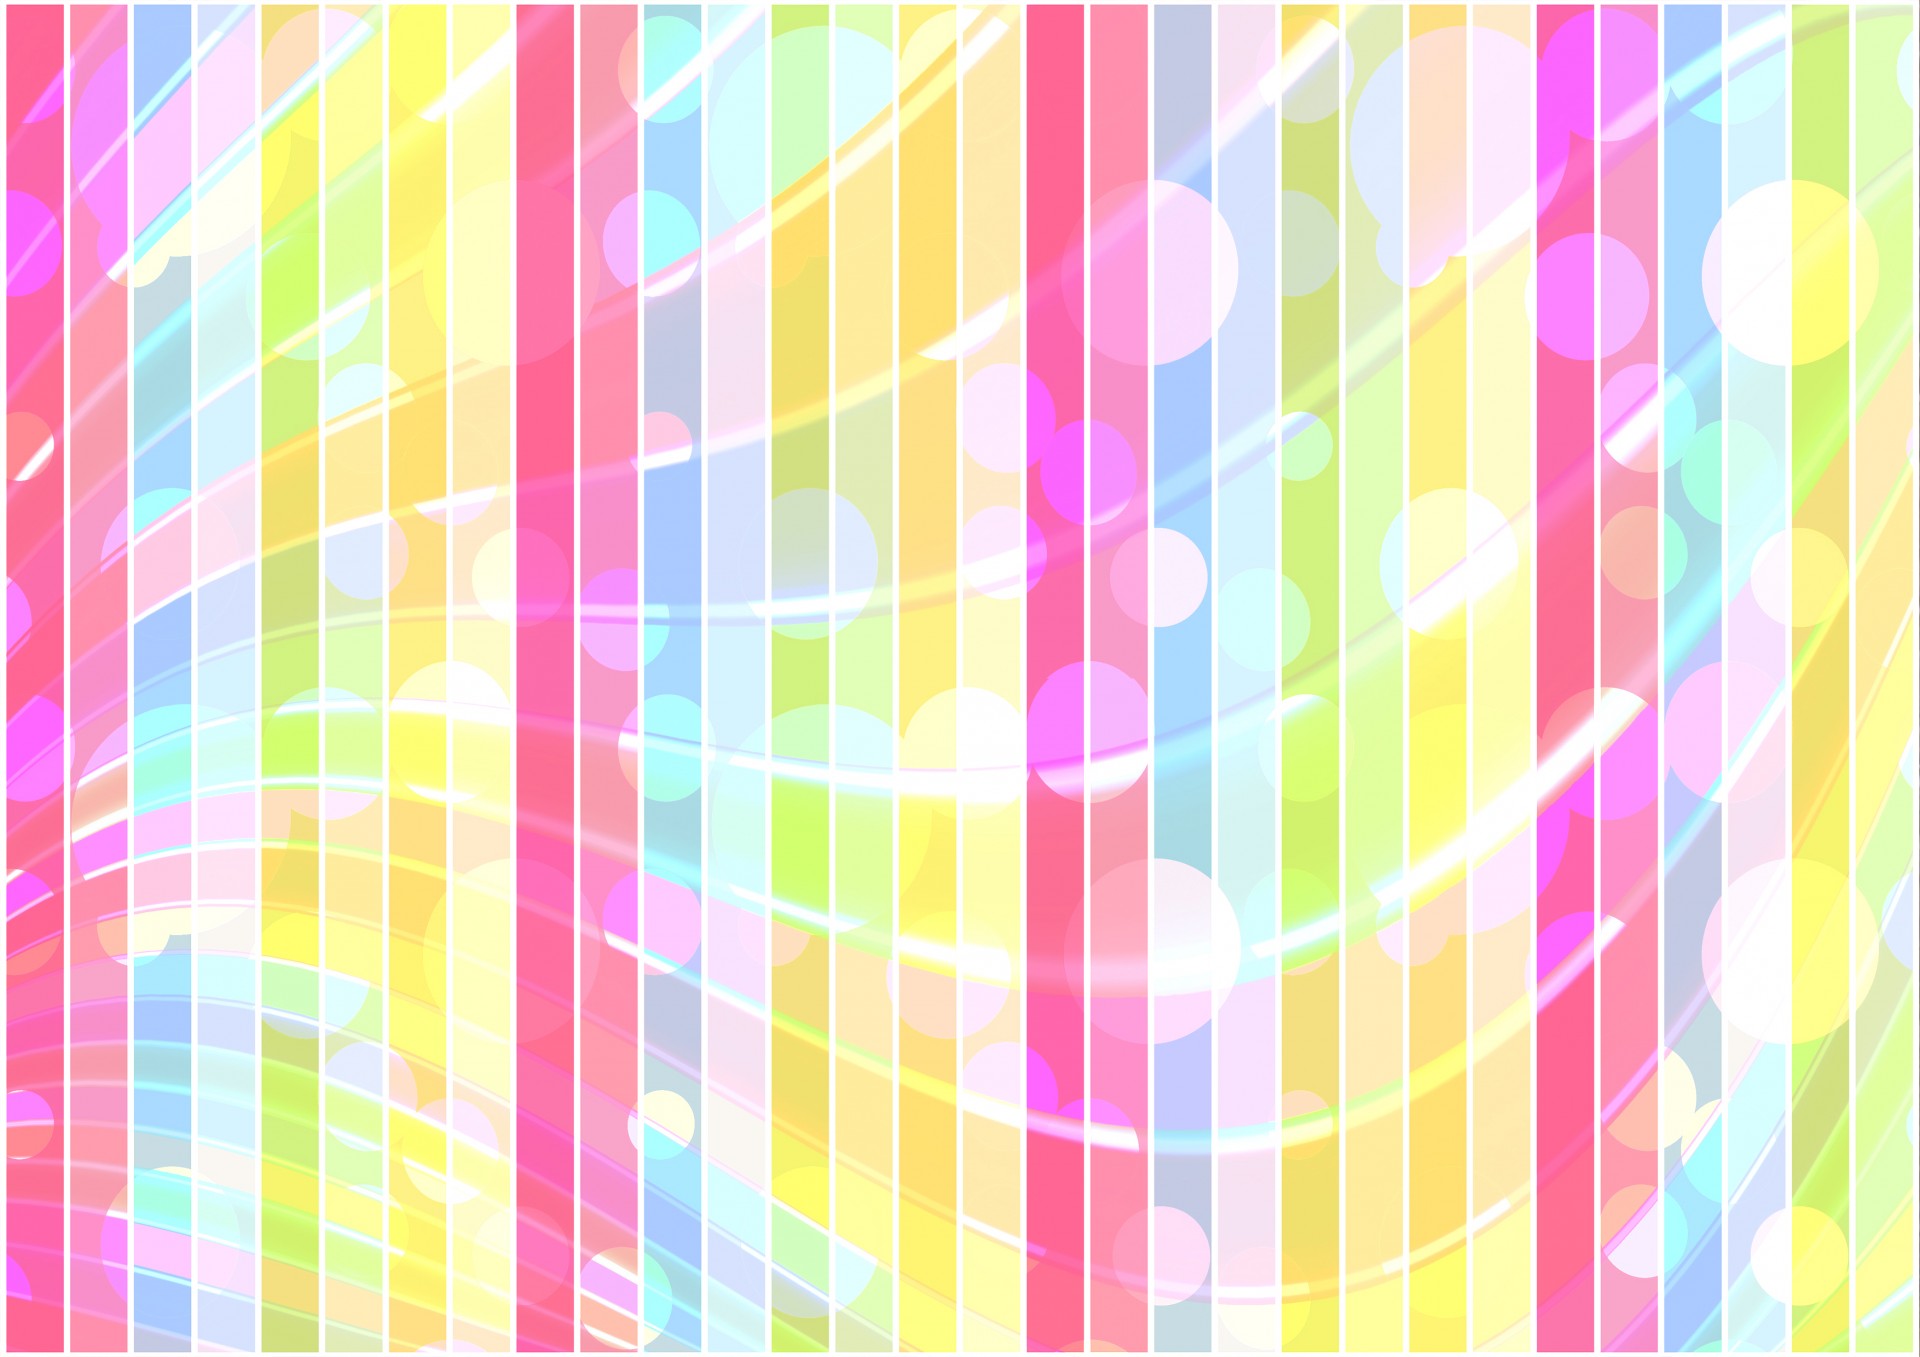 Abstract Stripes Colorful Background